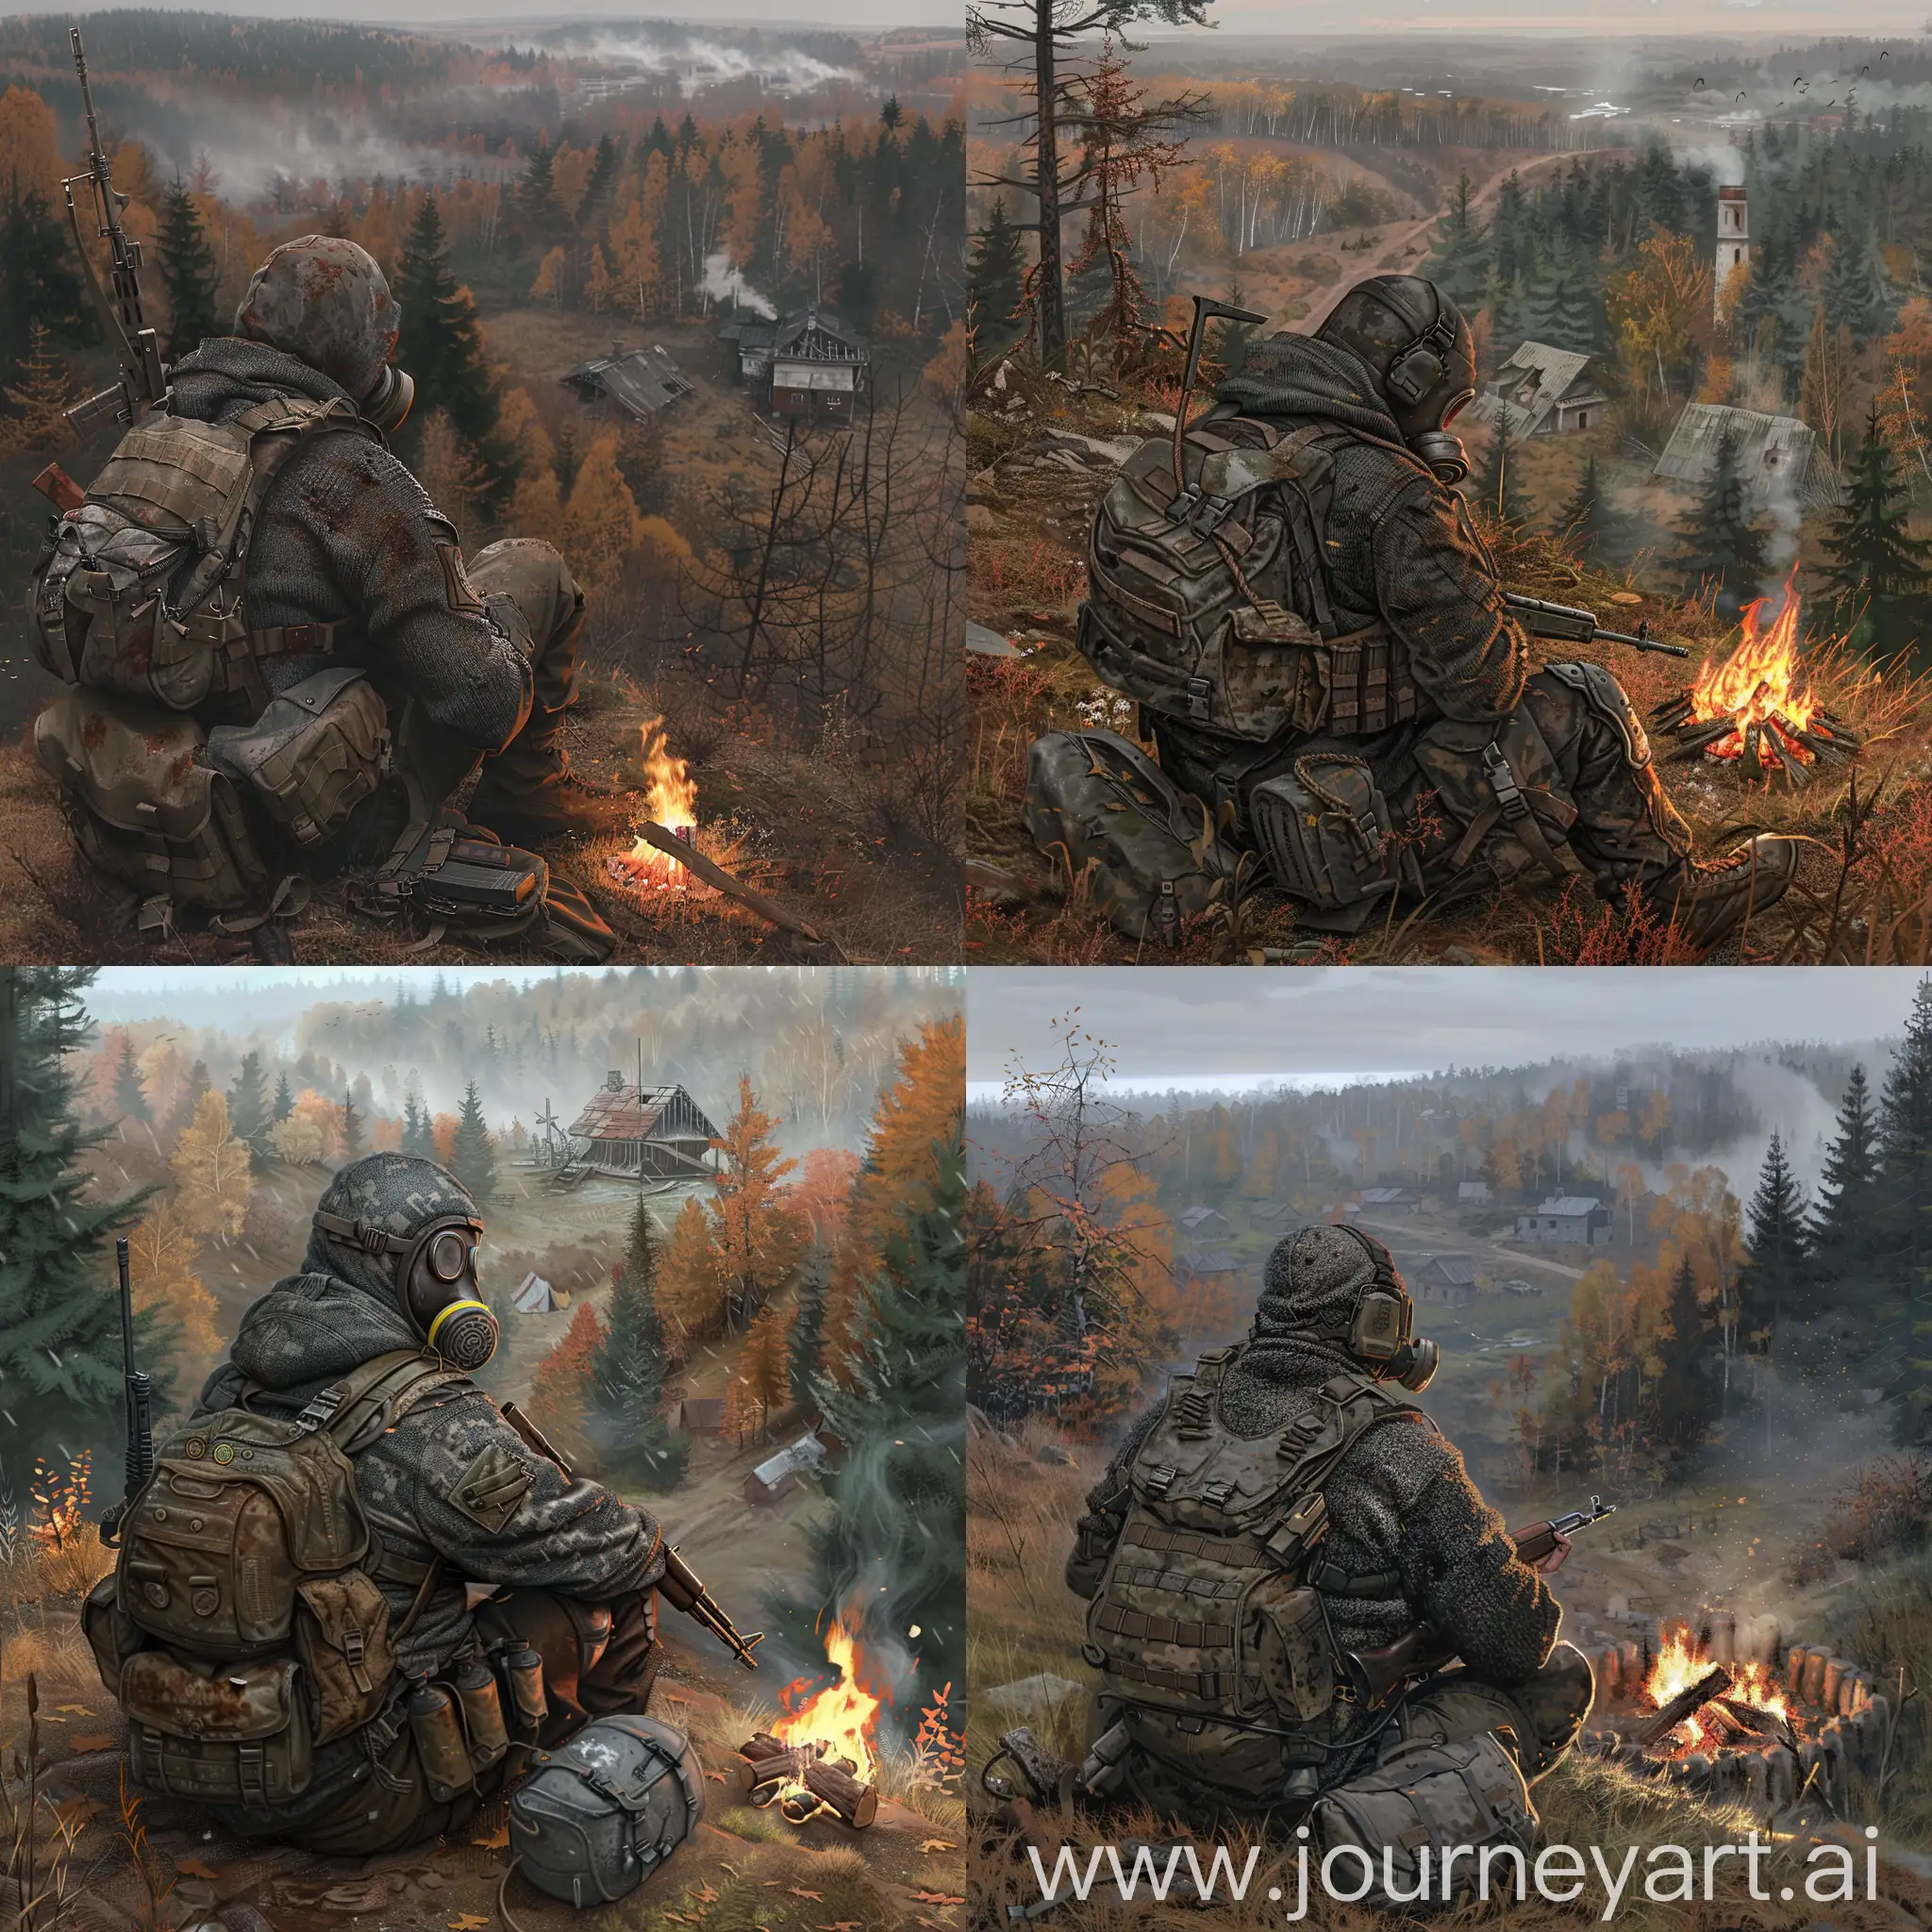 Stalker-with-Rifle-by-Campfire-in-Gloomy-Autumn-Forest